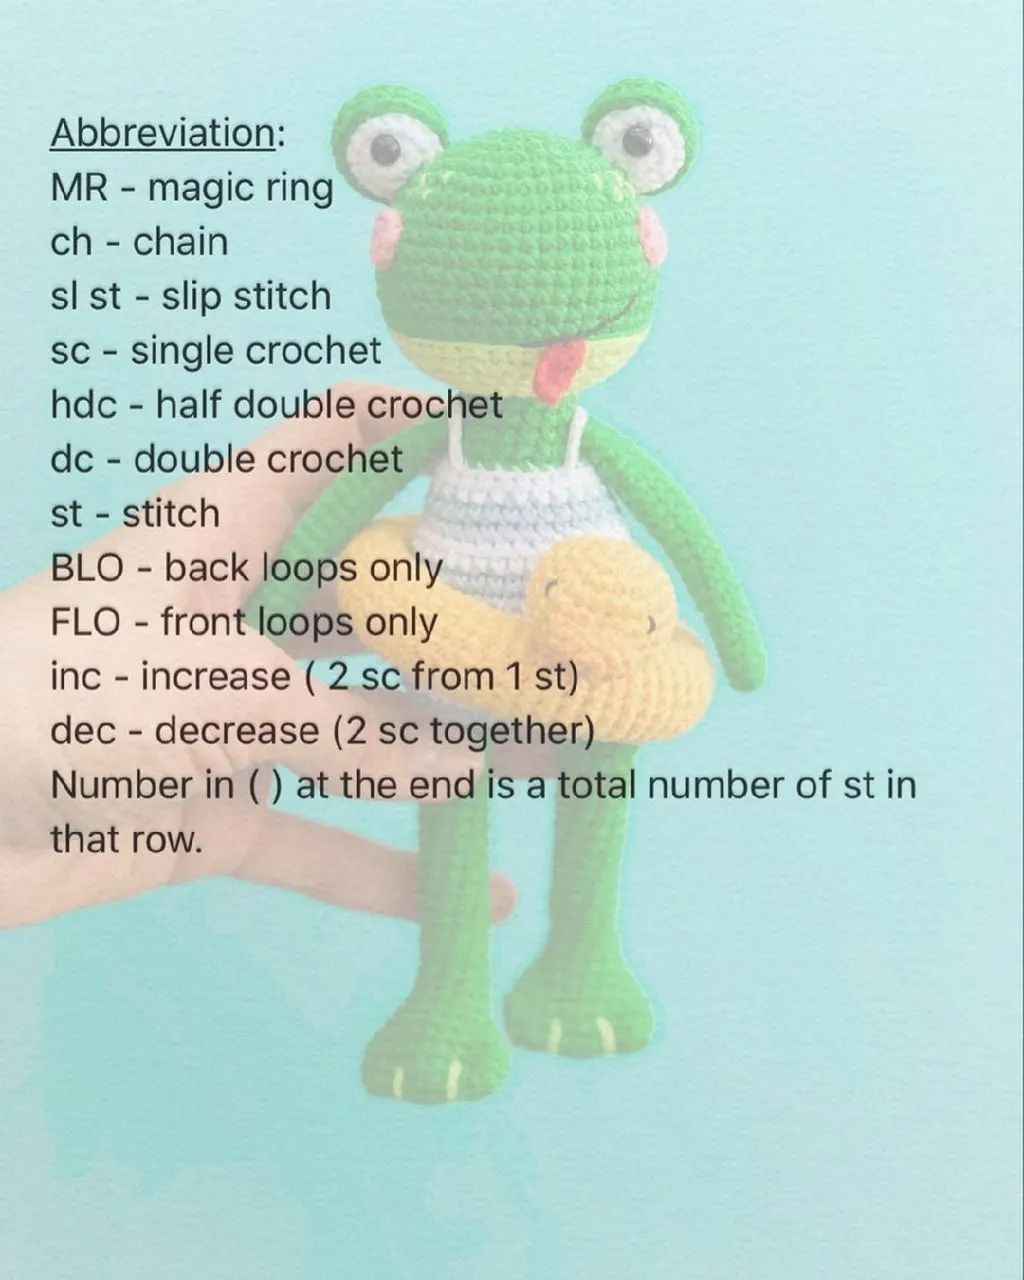 Green frog crochet pattern with bulging eyes for swimming.